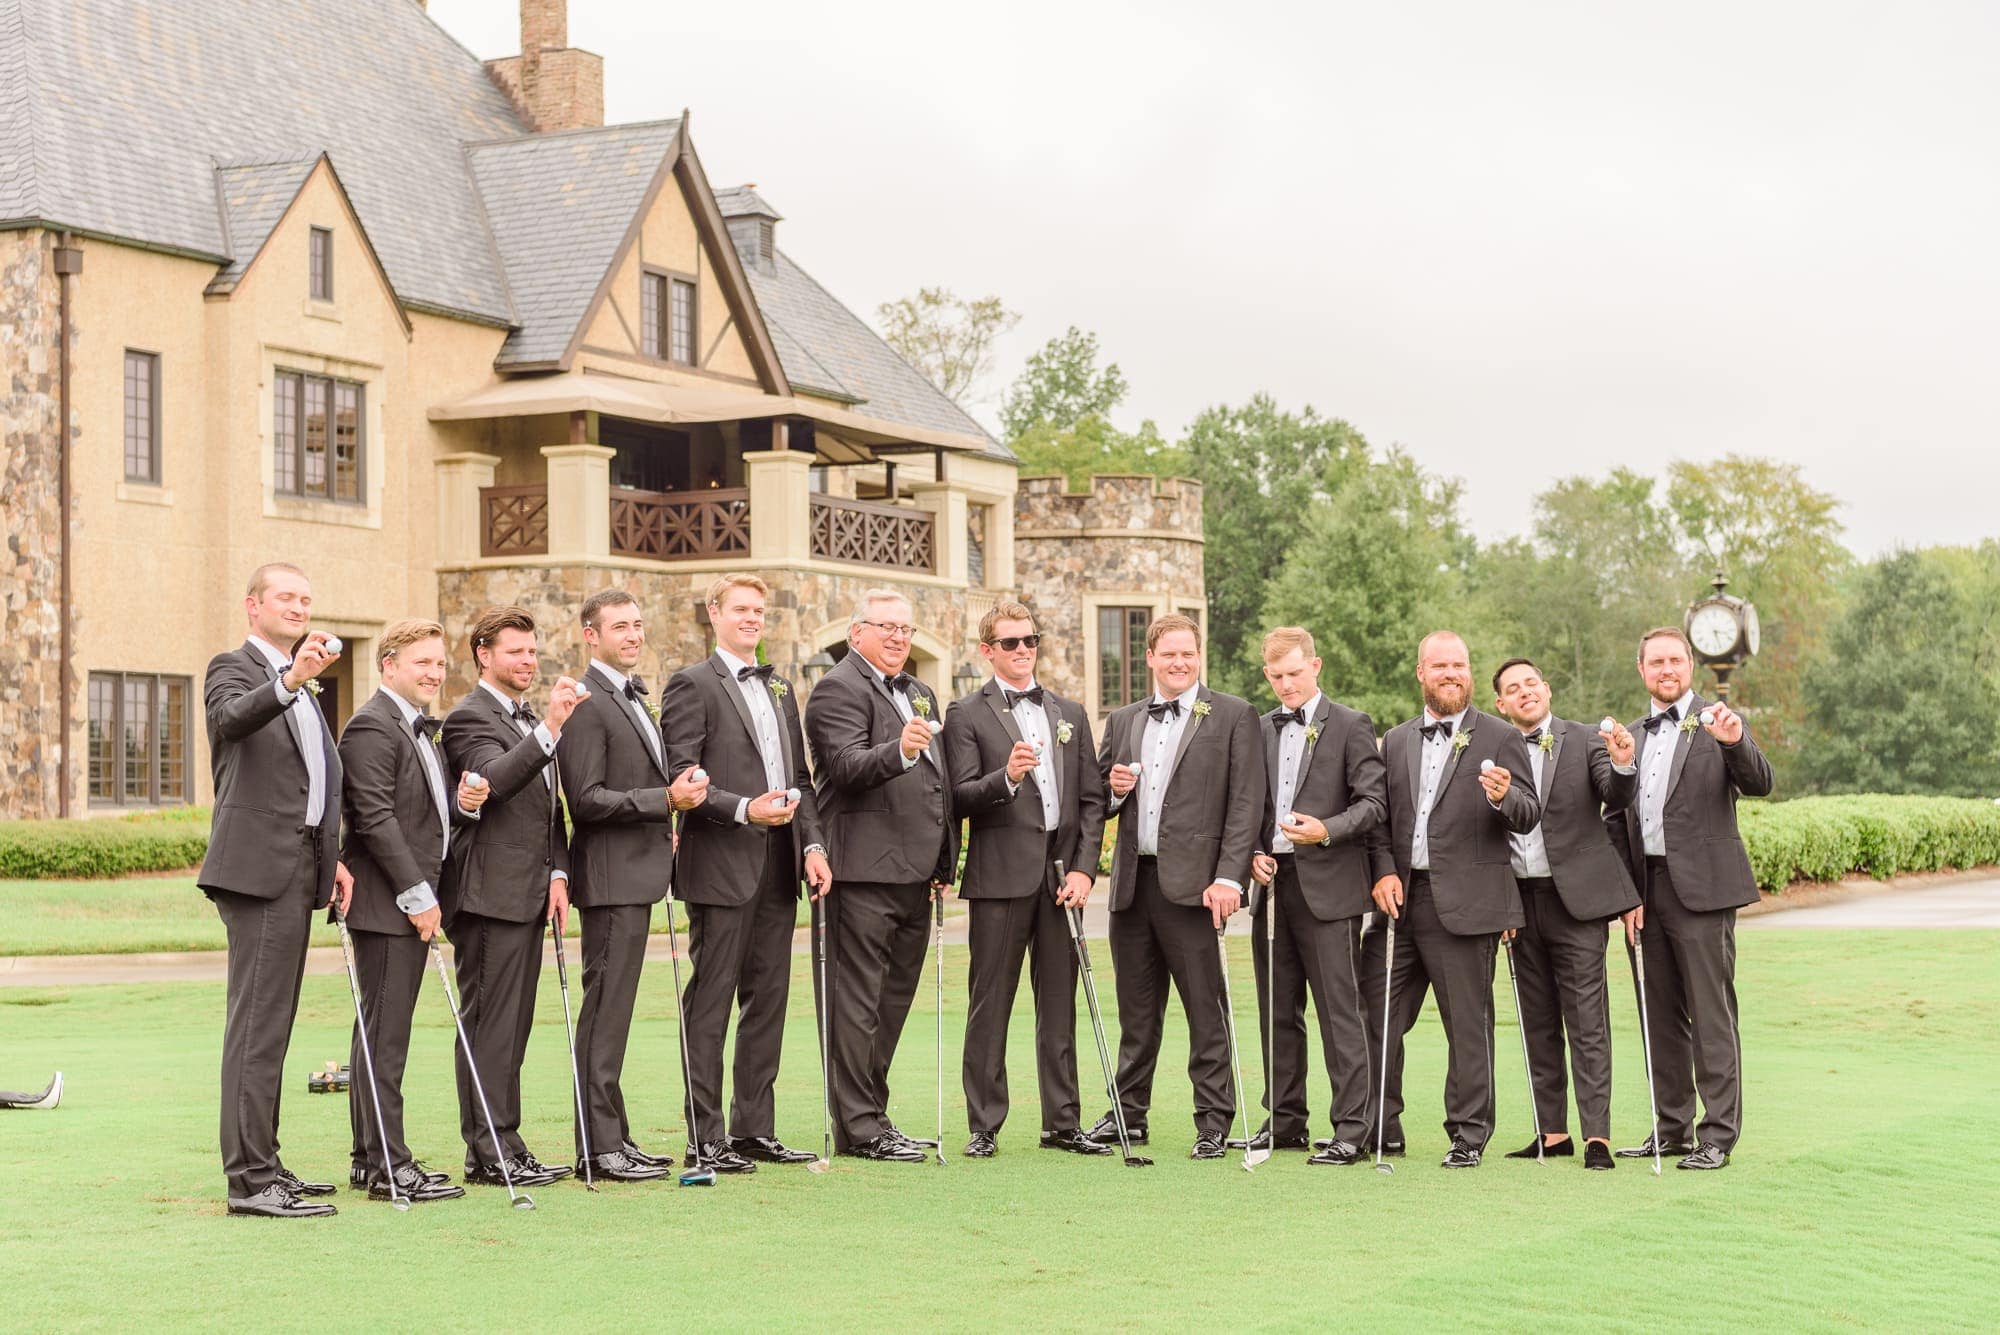 The Longview Country Club in Charlotte has a golf course out back, which looks beautiful in photos and let the groomsmen blow off some steam.